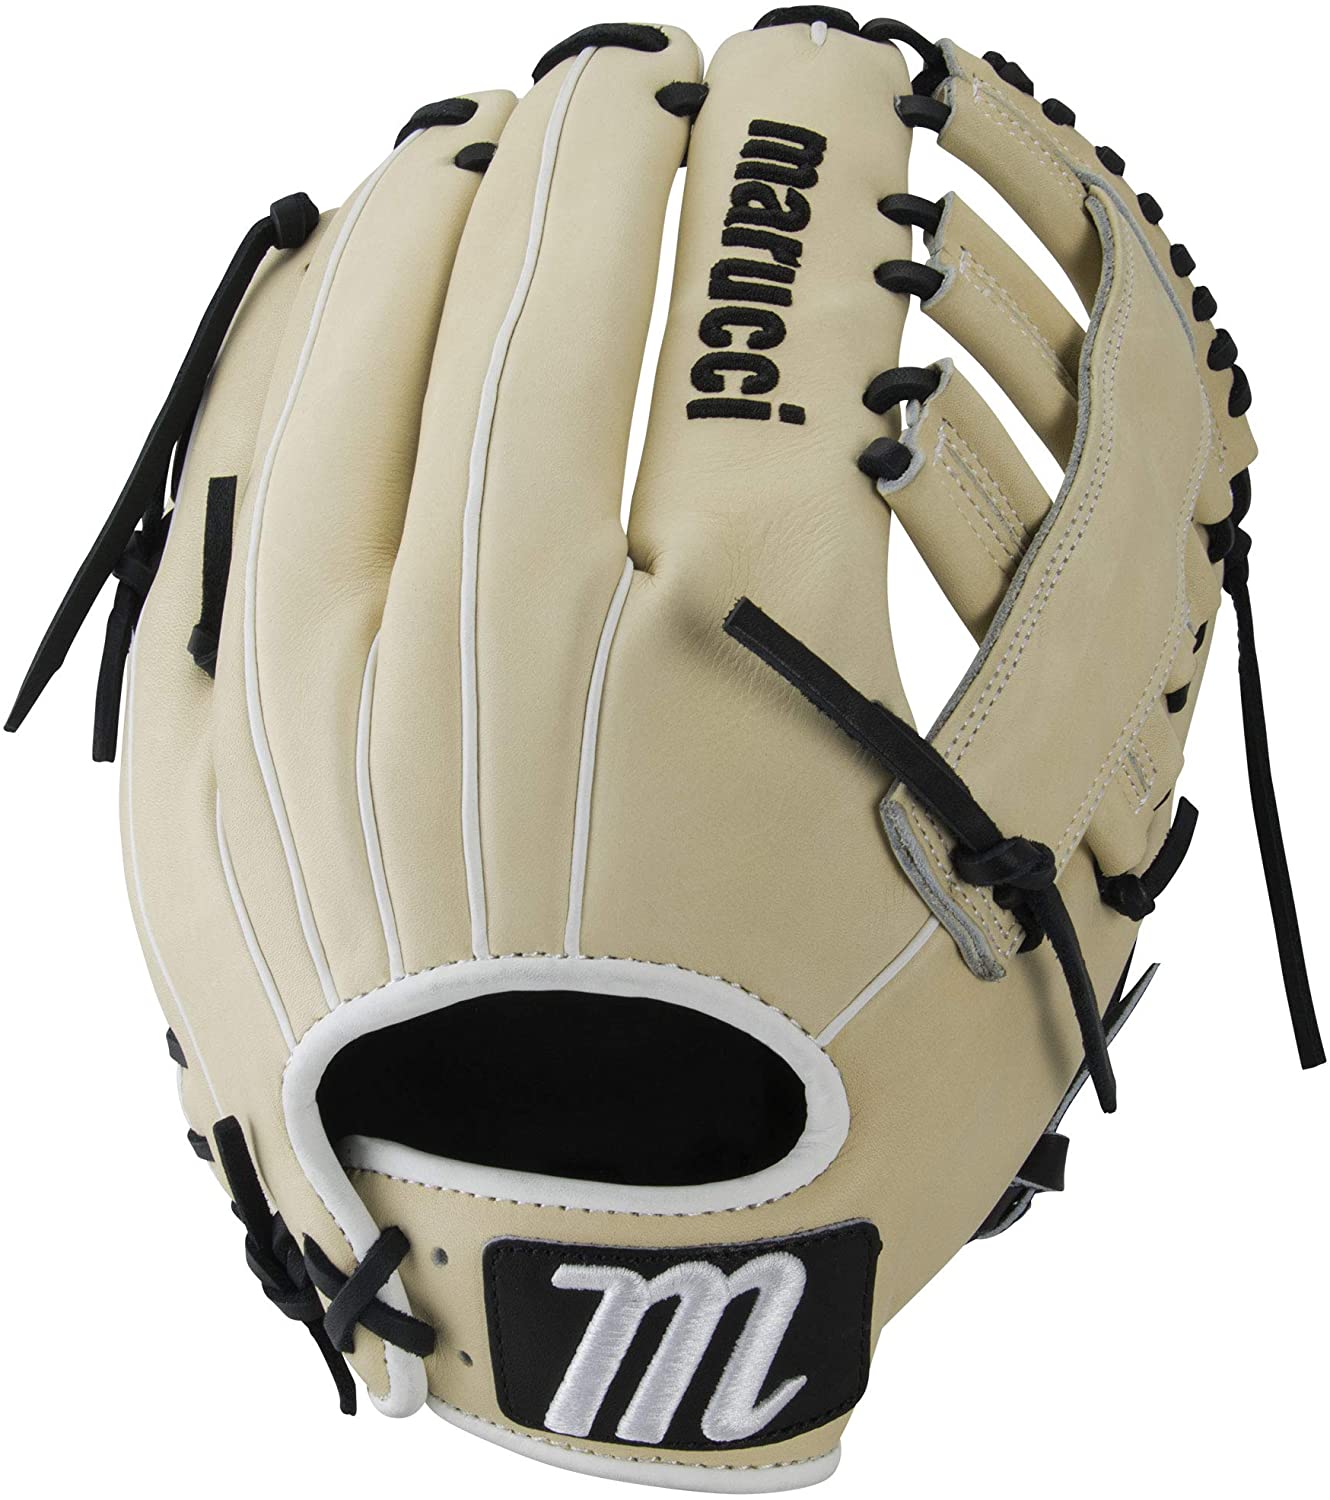 marucci-magnolia-series-13-fast-pitch-softball-glove-two-bar-post-right-hand-throw MFGMG13FP-CMBK-RightHandThrow Marucci  Premium Japanese-tanned steer hide leather provides stiffness and rugged durability Cushioned